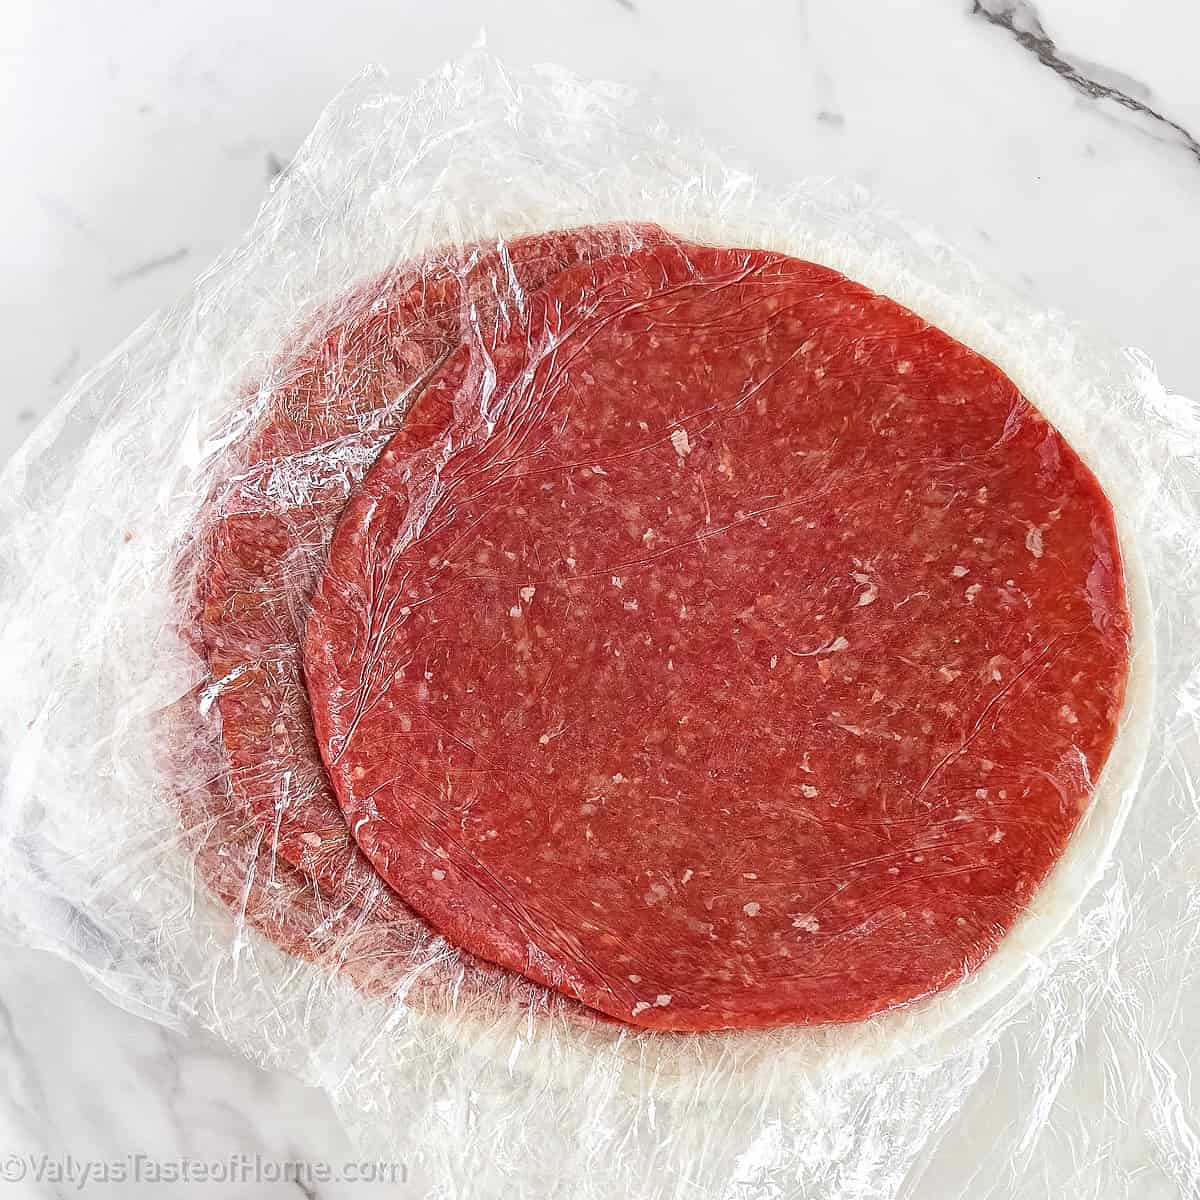 Roll one piece of ground beef at a time in between 2 layers of plastic food wrap. Make them thin and much larger than the tortilla itself.